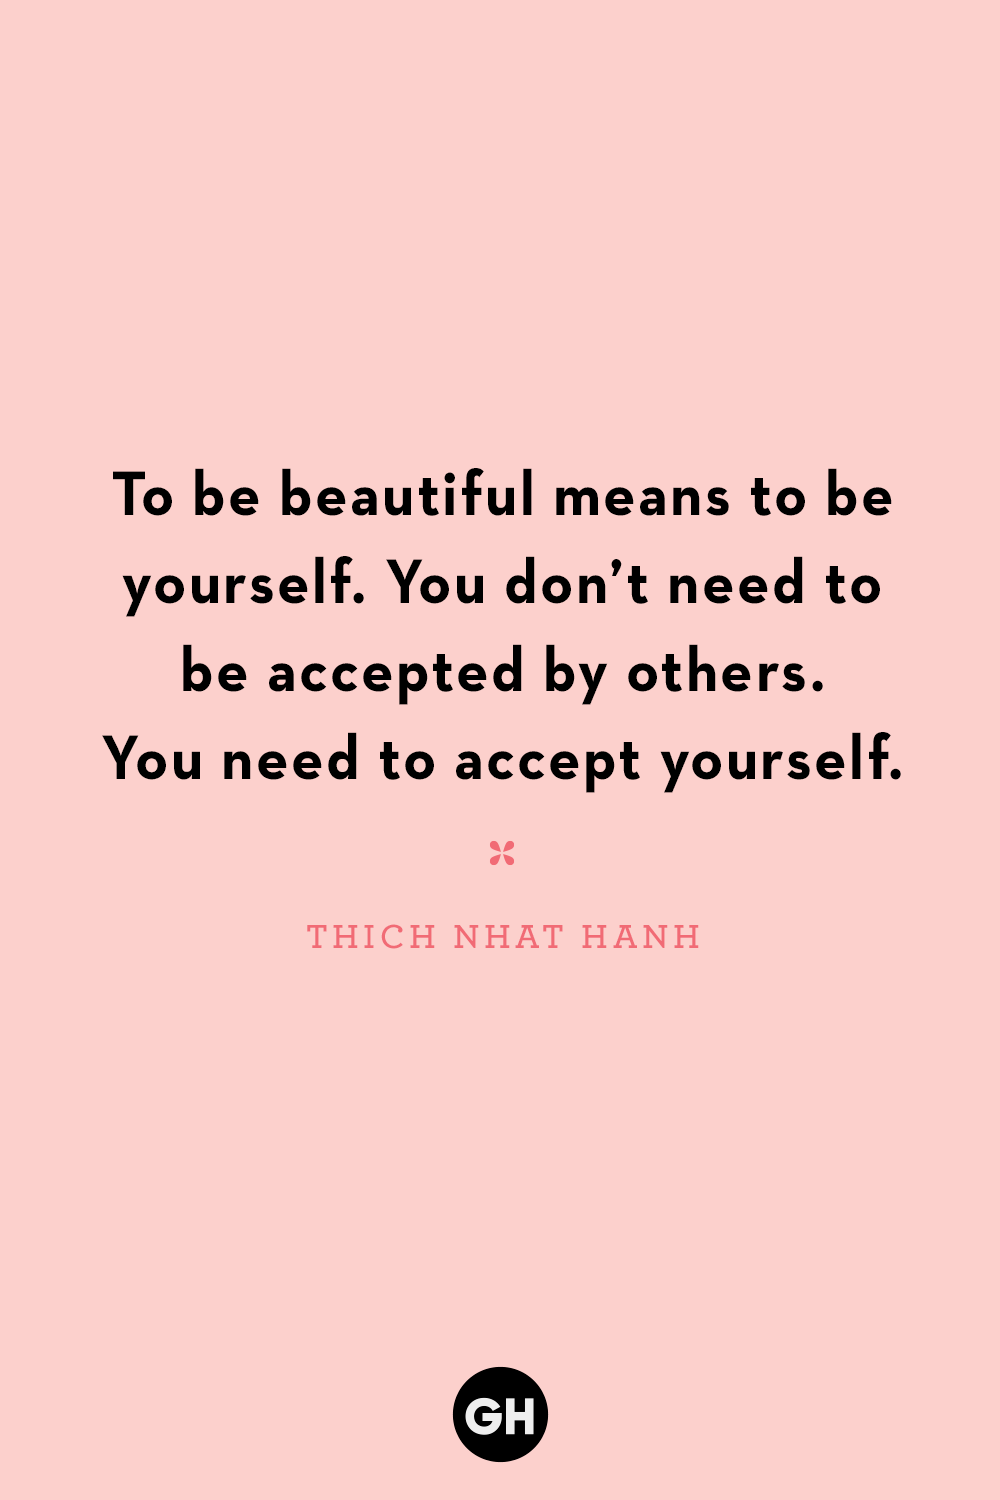 quotes about beauty and loving yourself